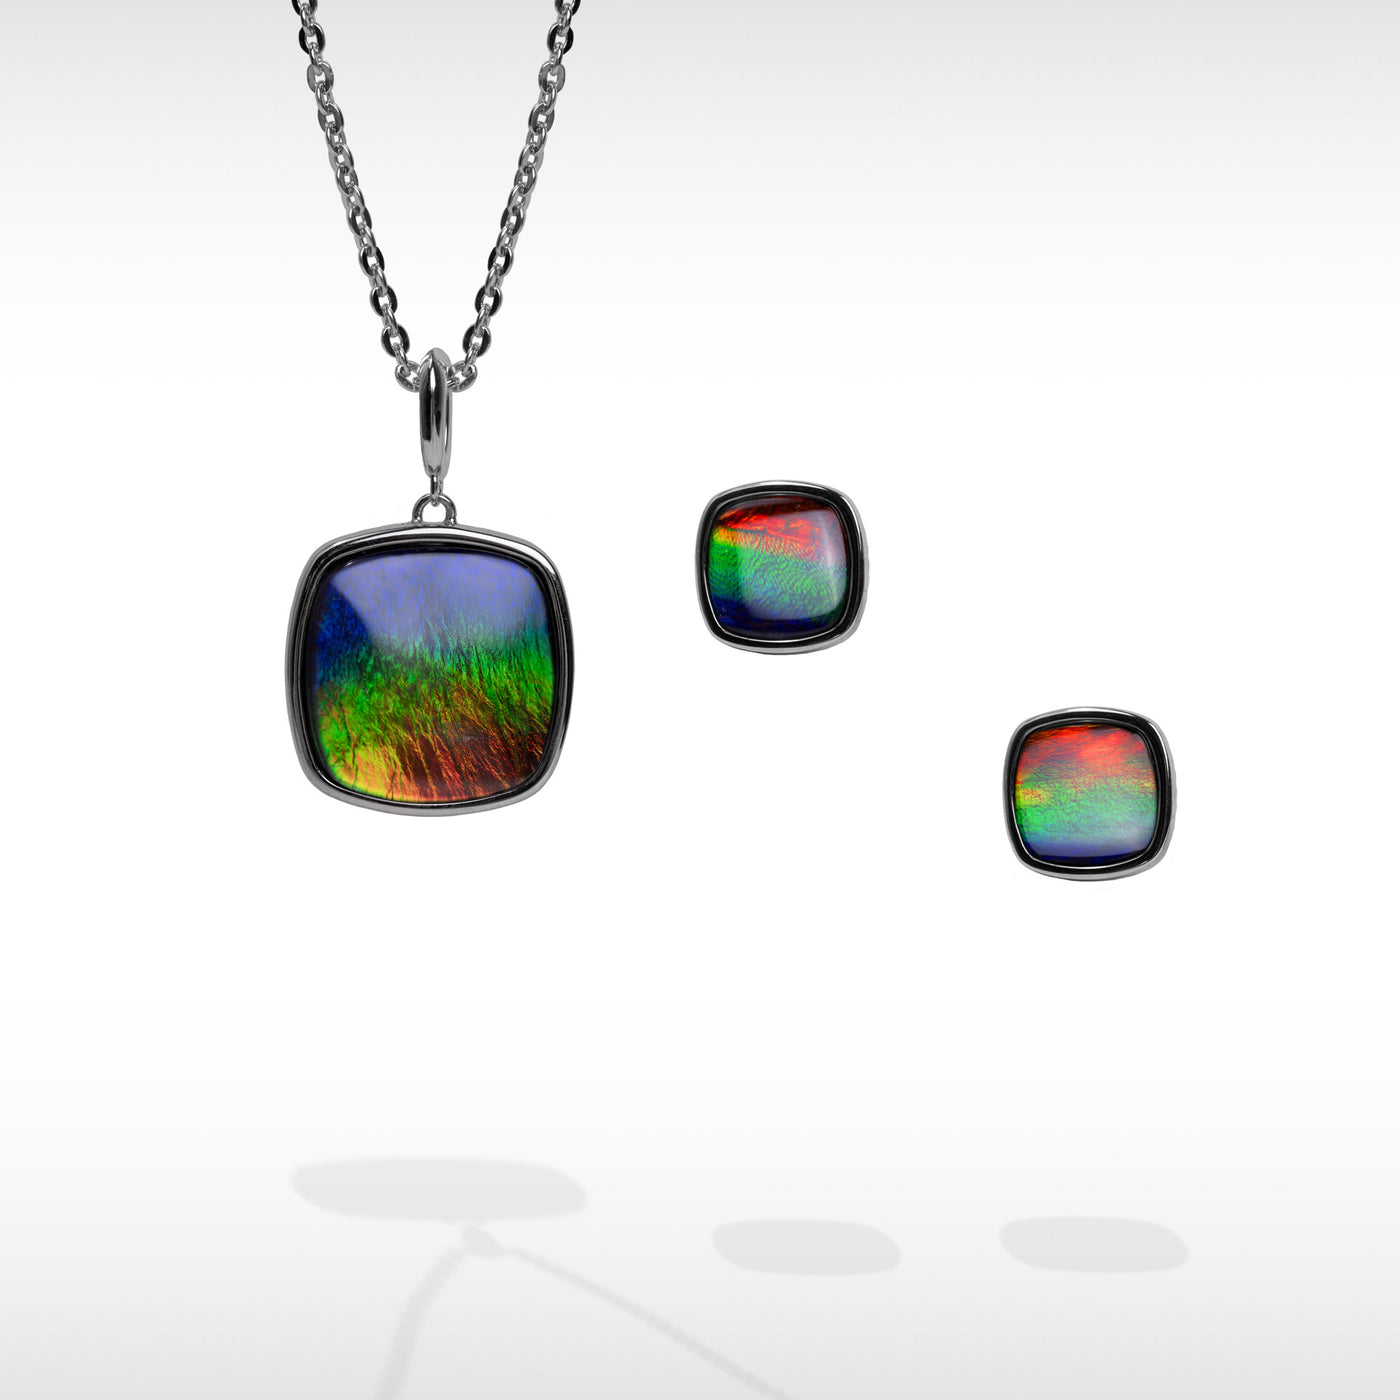 Origins cushion ammolite pendant and earring set in sterling silver